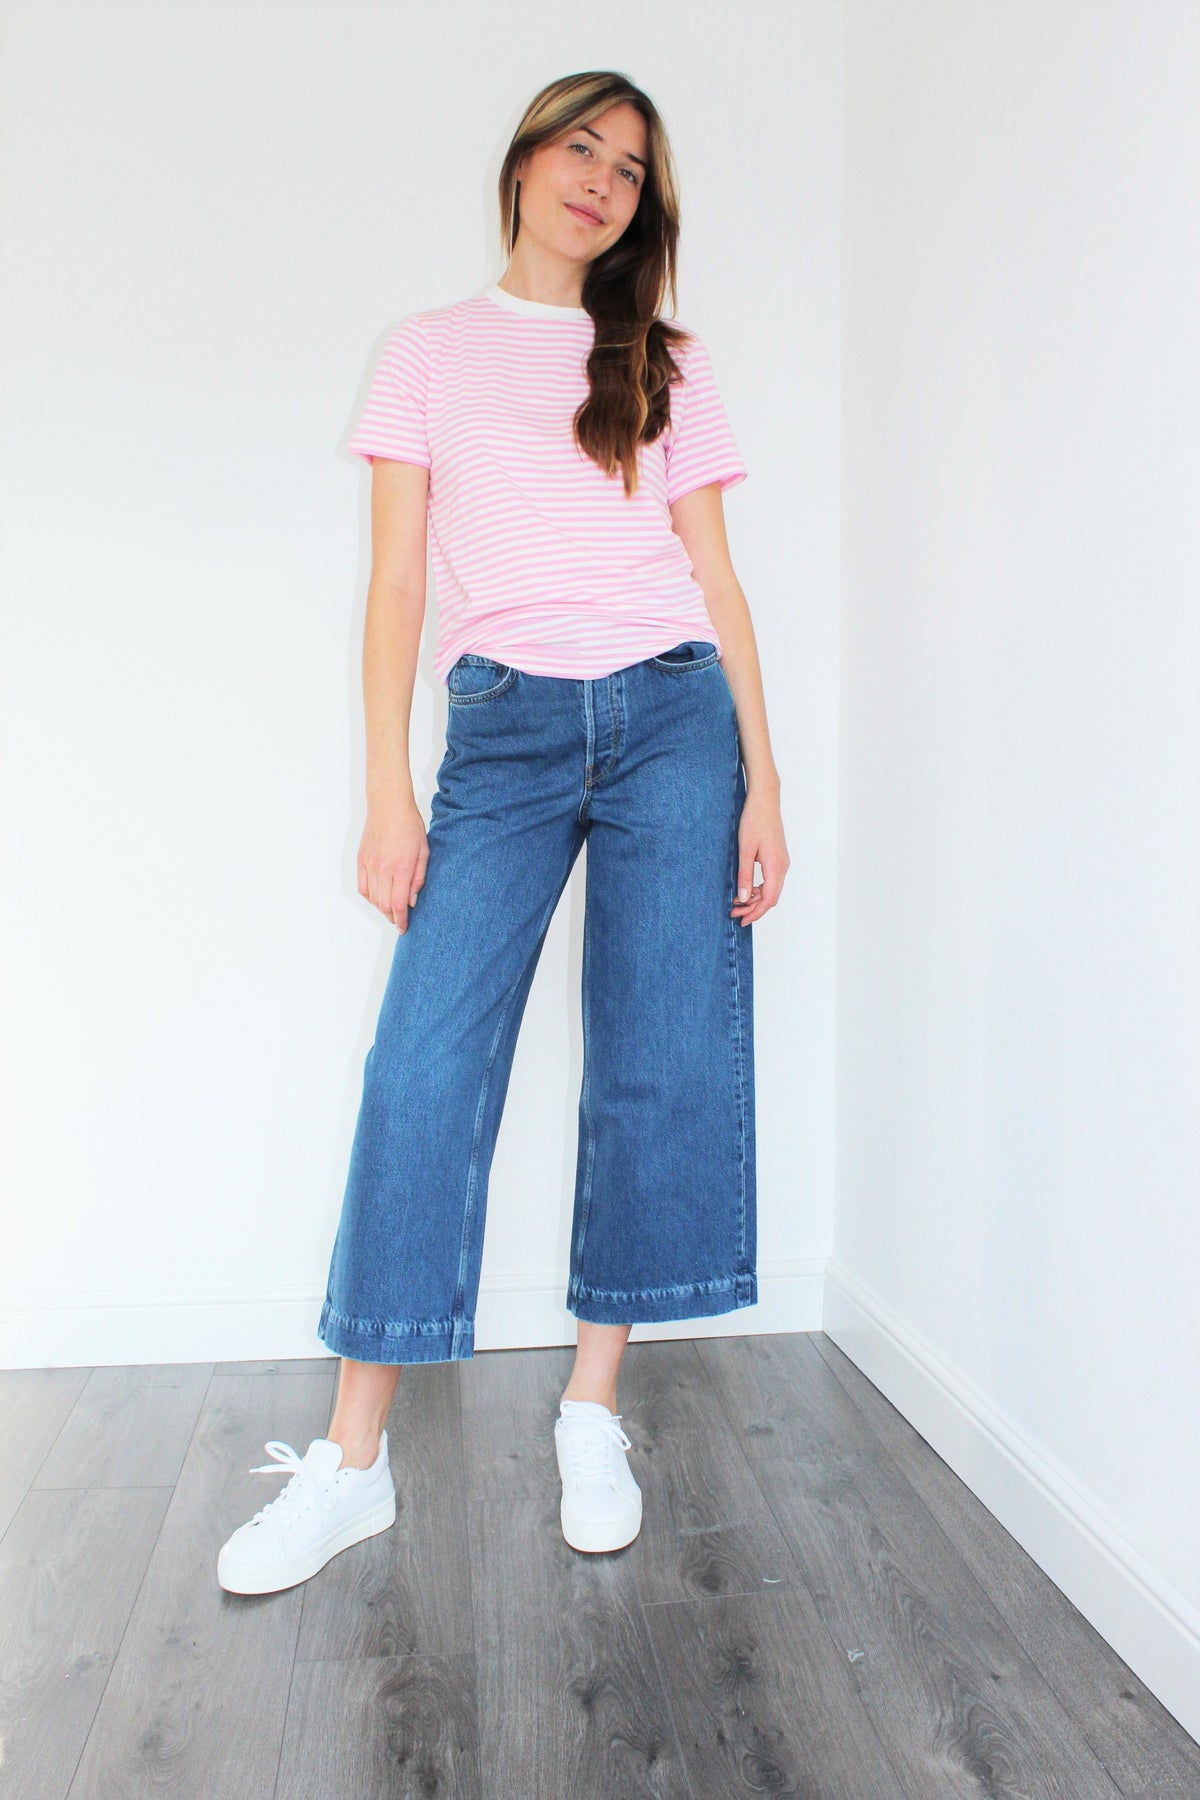 SLF My Perfect Stripe Tee in Prism Pink and Snow